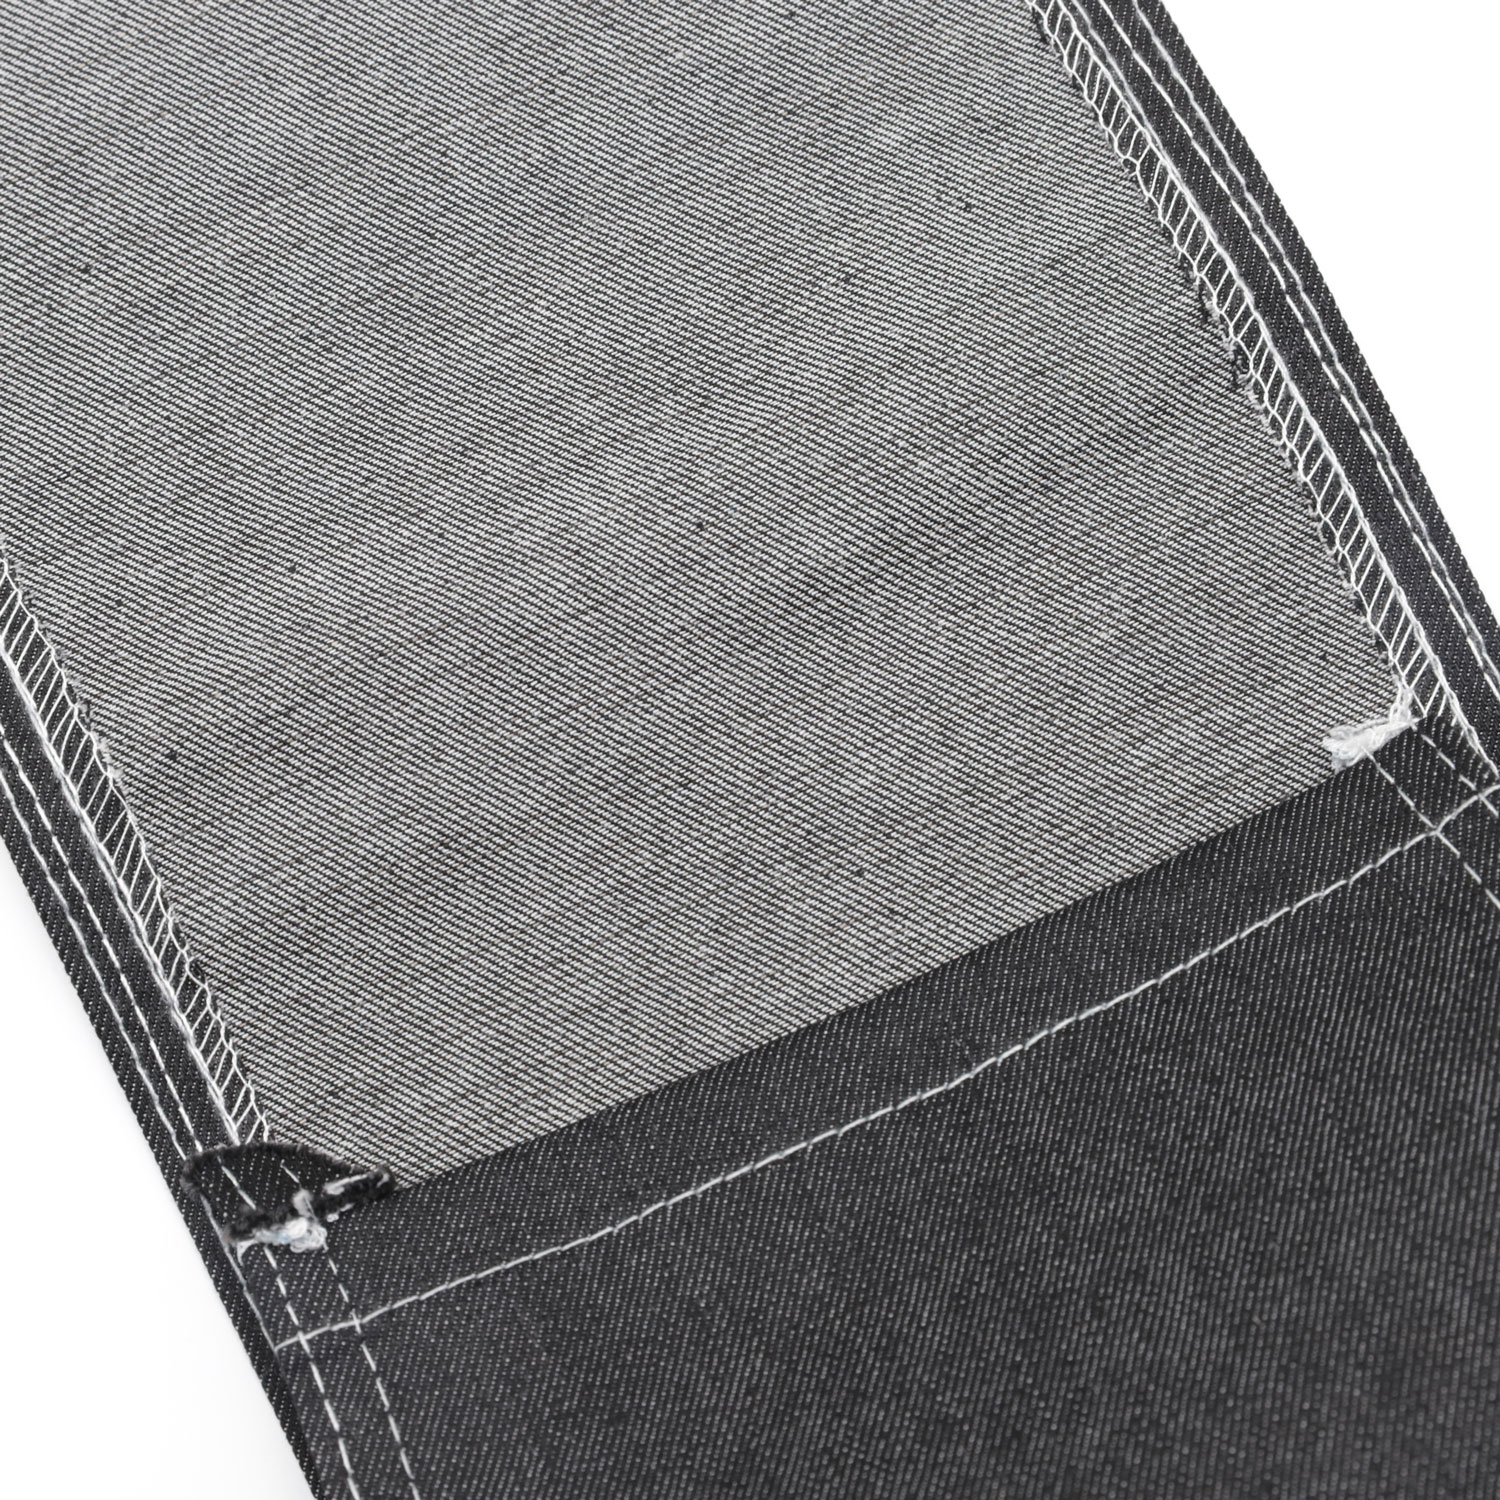 The Benefits of Using the Right Denim Stretch Denim Fabric 1